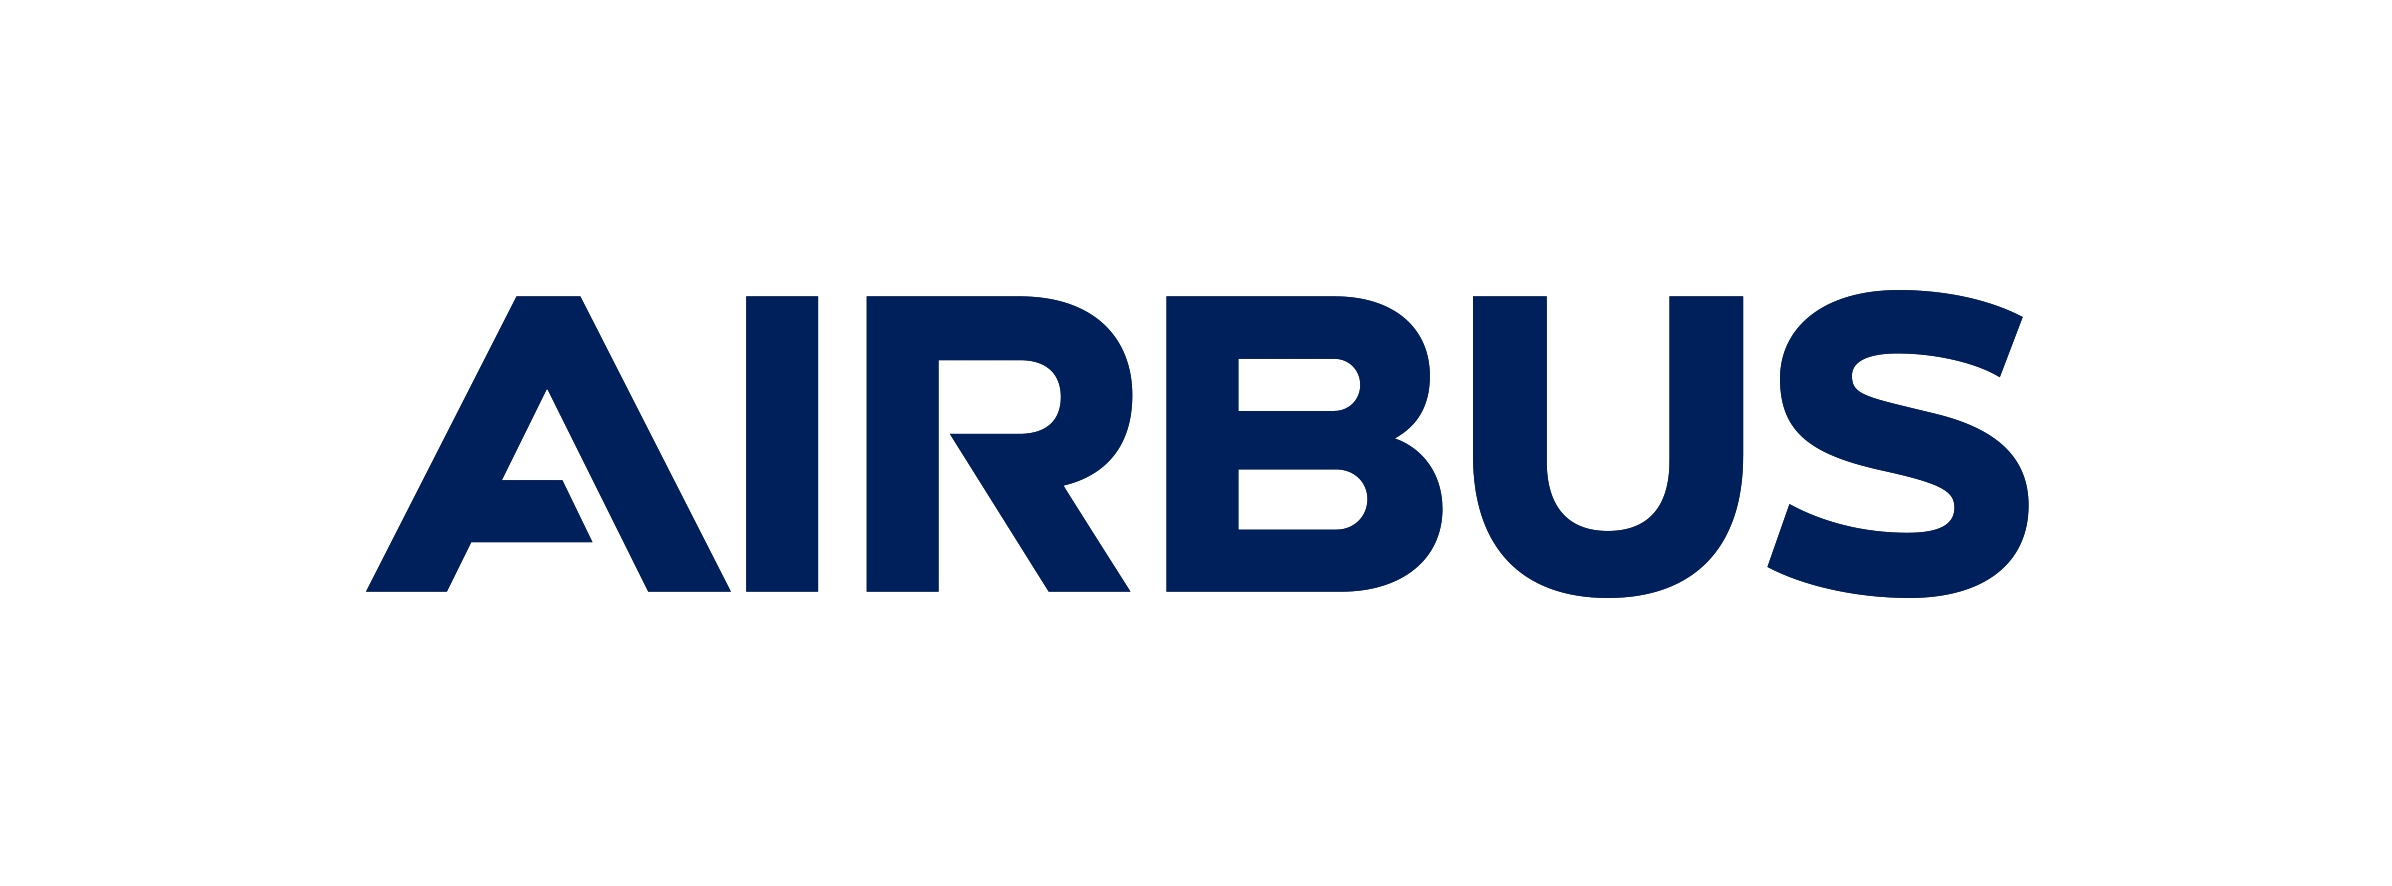 images/AIRBUS_RGB.PNG